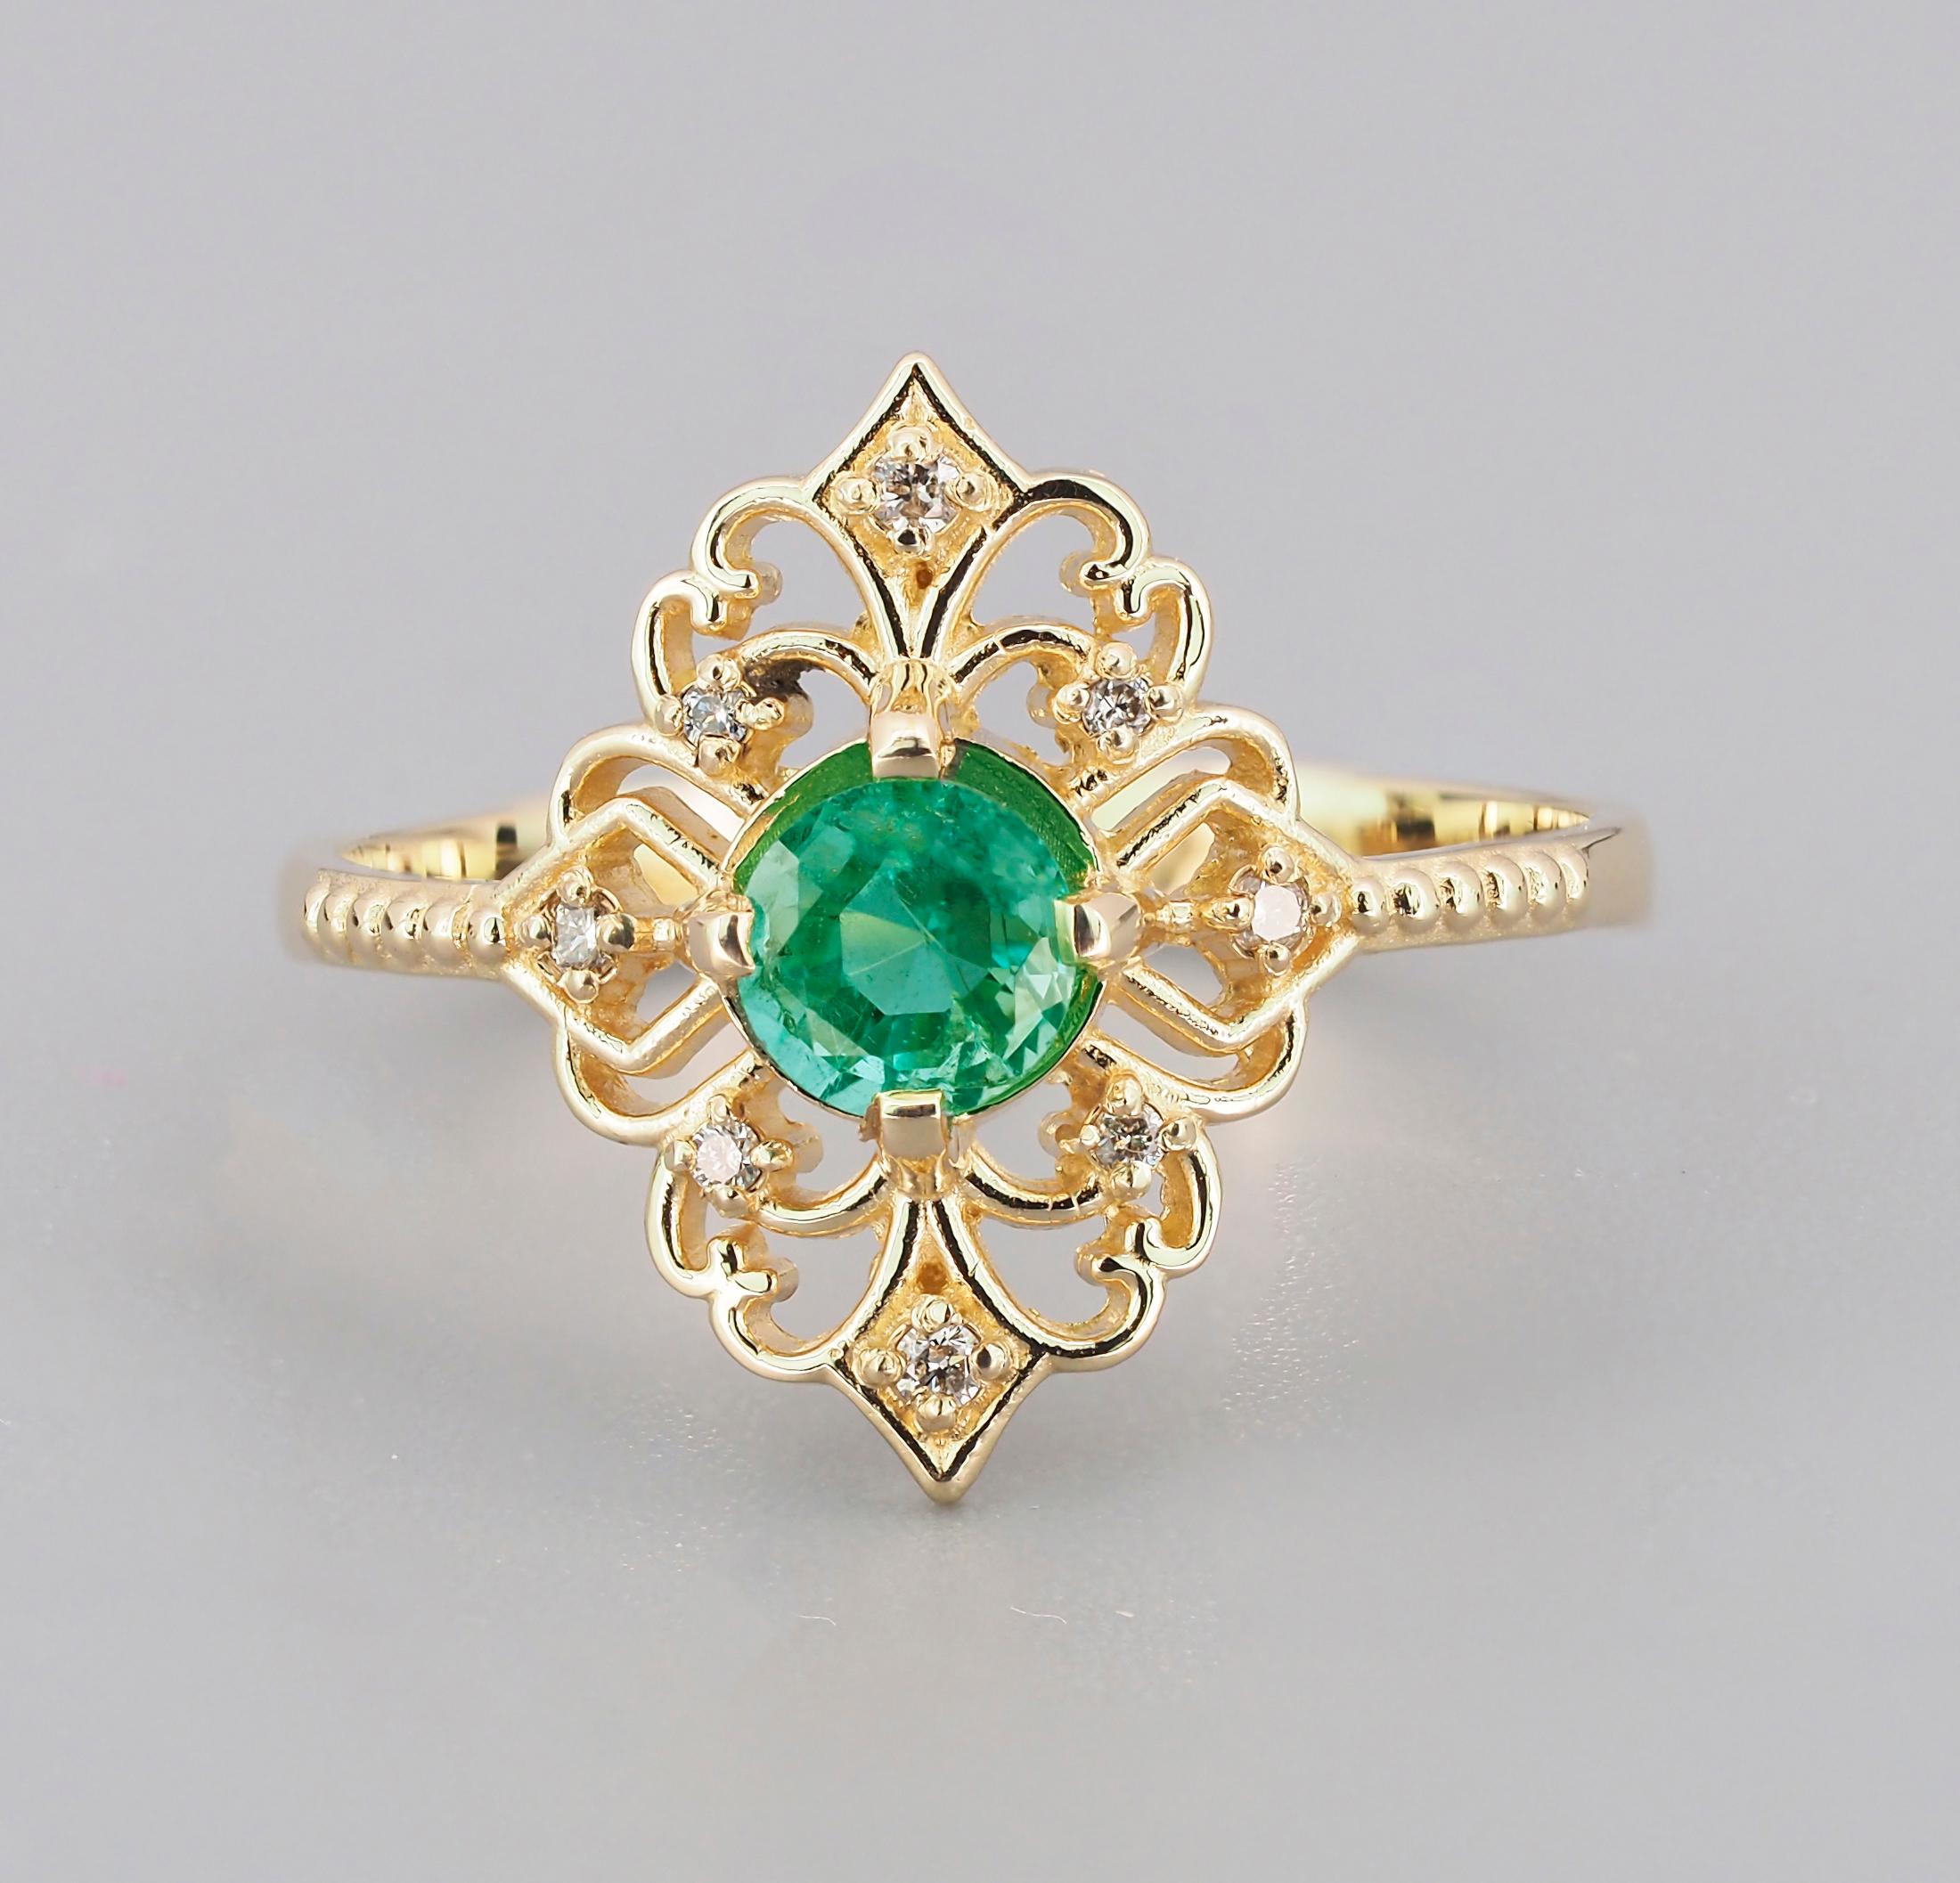 For Sale:  14 K Gold Ring with Emerald and Diamonds 16